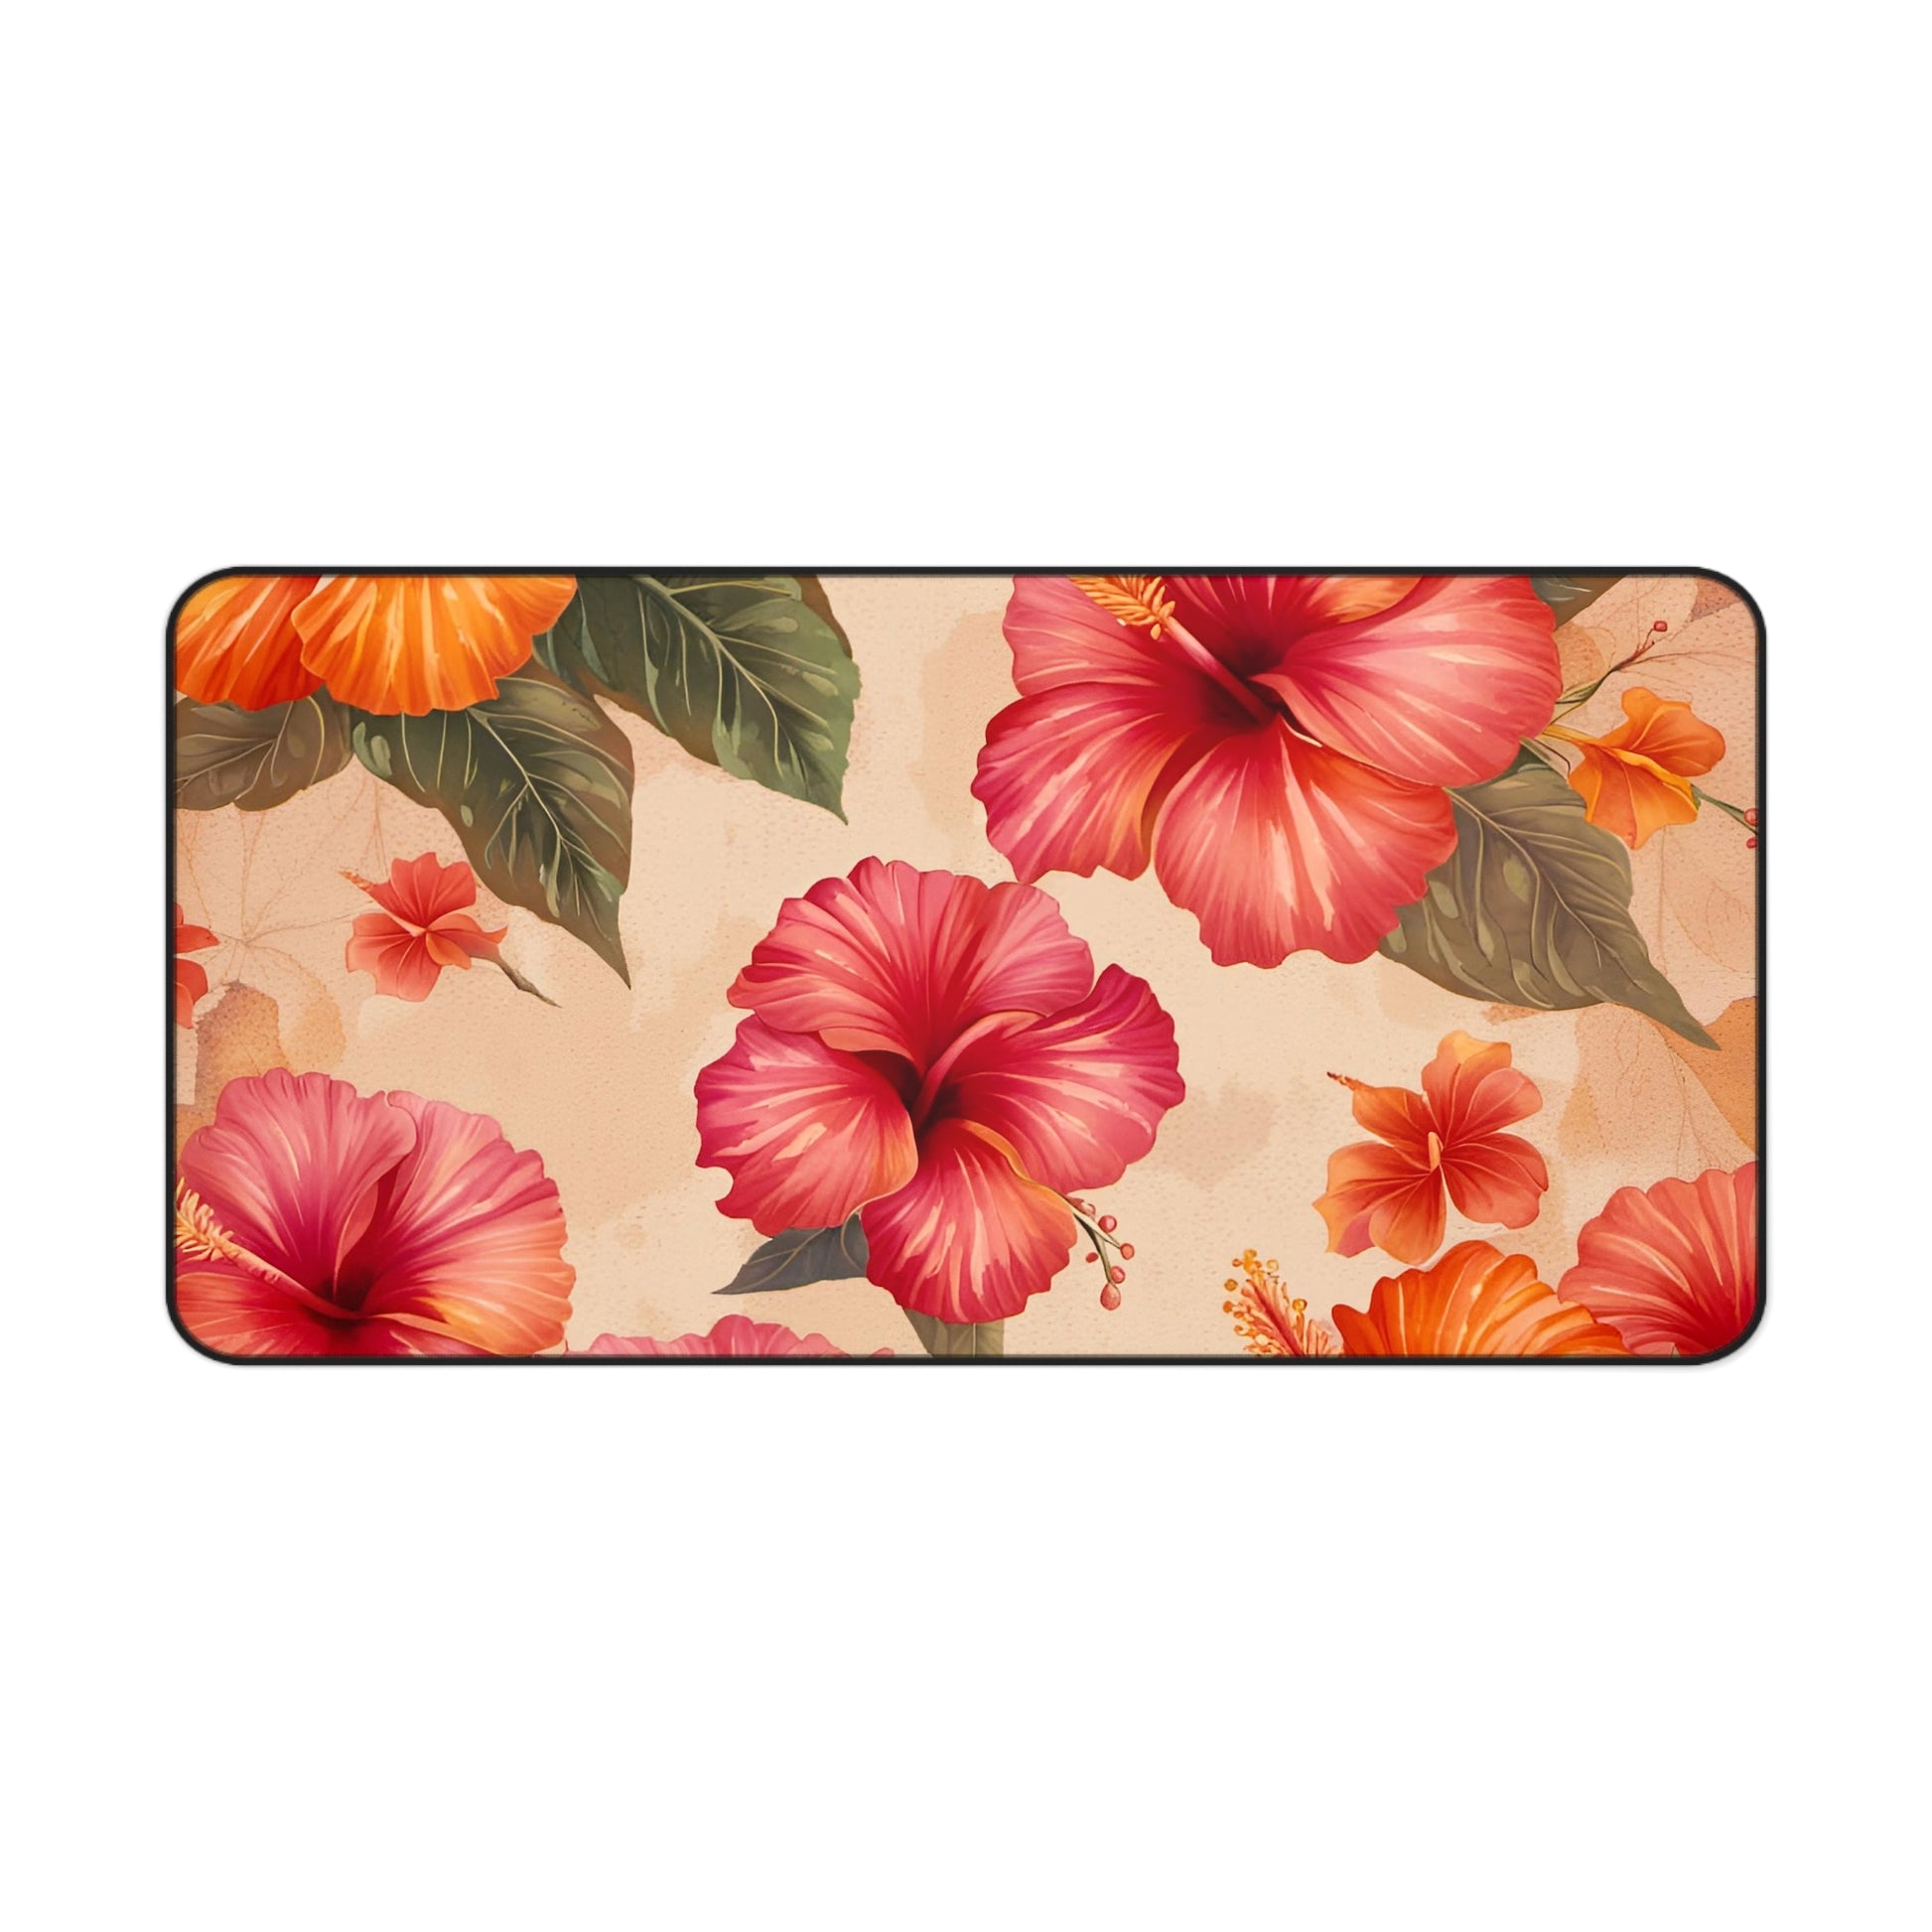 Hibiscus Flowers on Distressed Background Printed on Desk mat 15x31